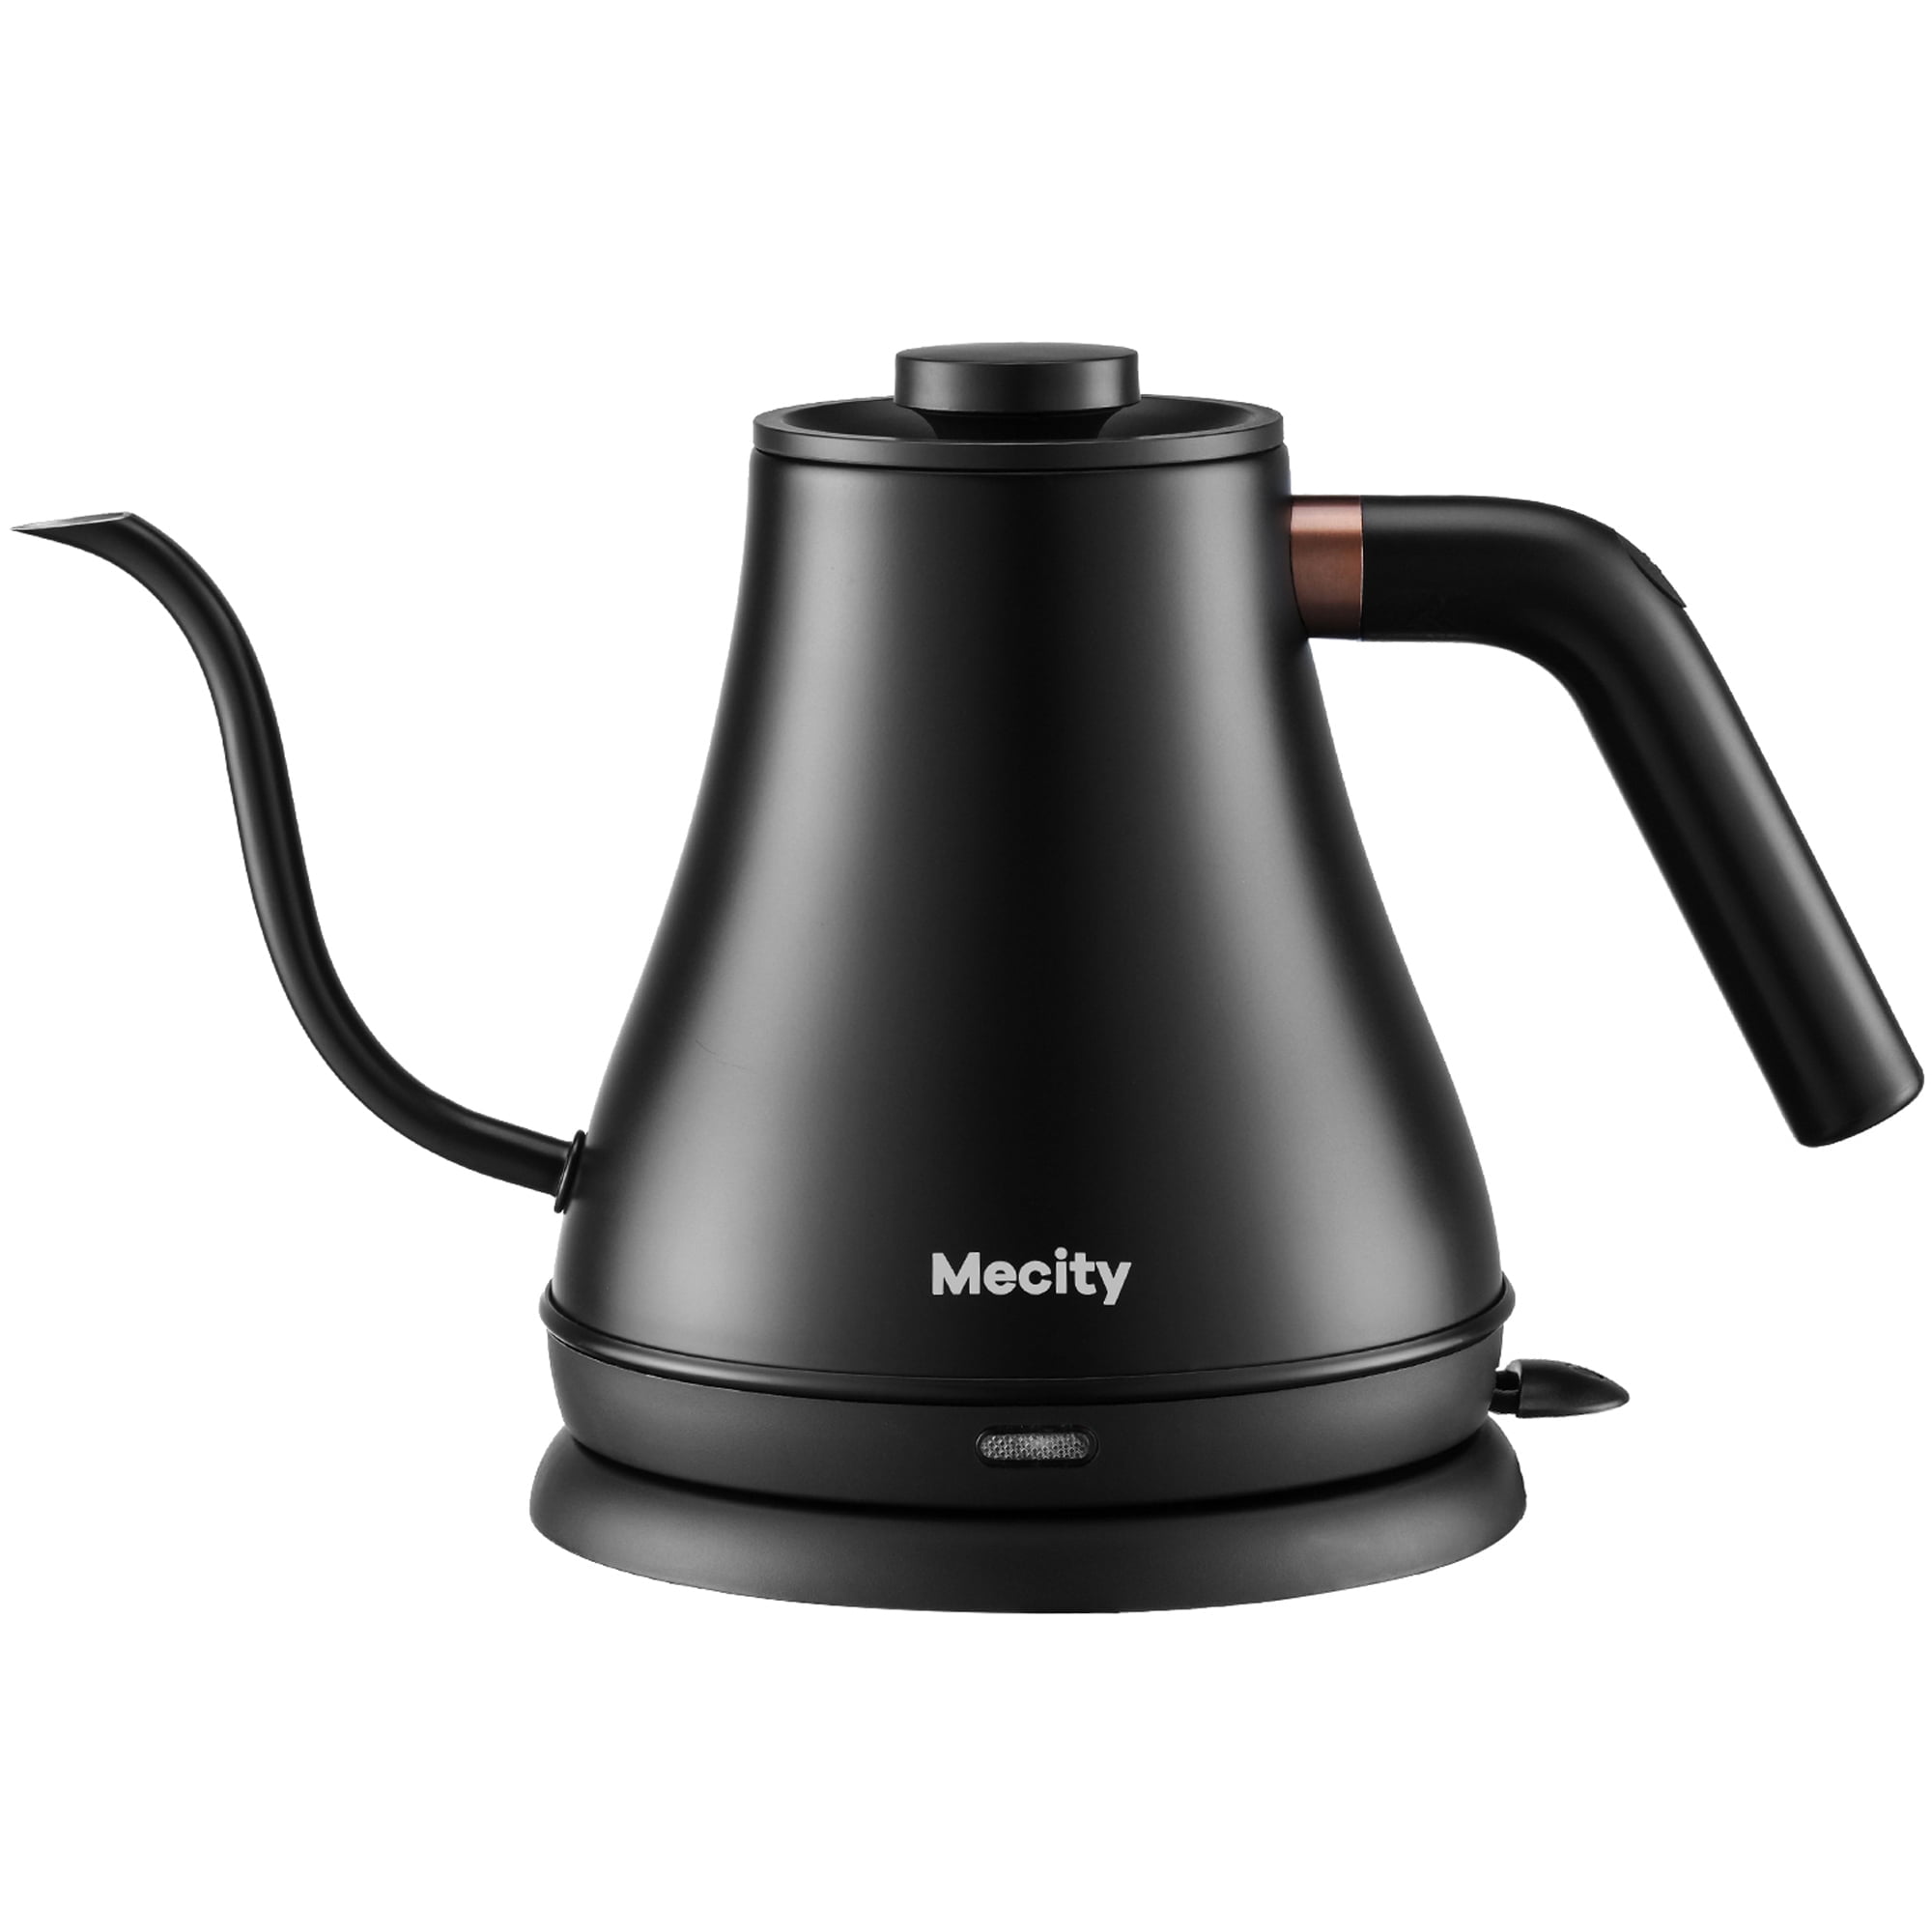 Mecity Electric Gooseneck Kettle With Keep Warm Function & LCD